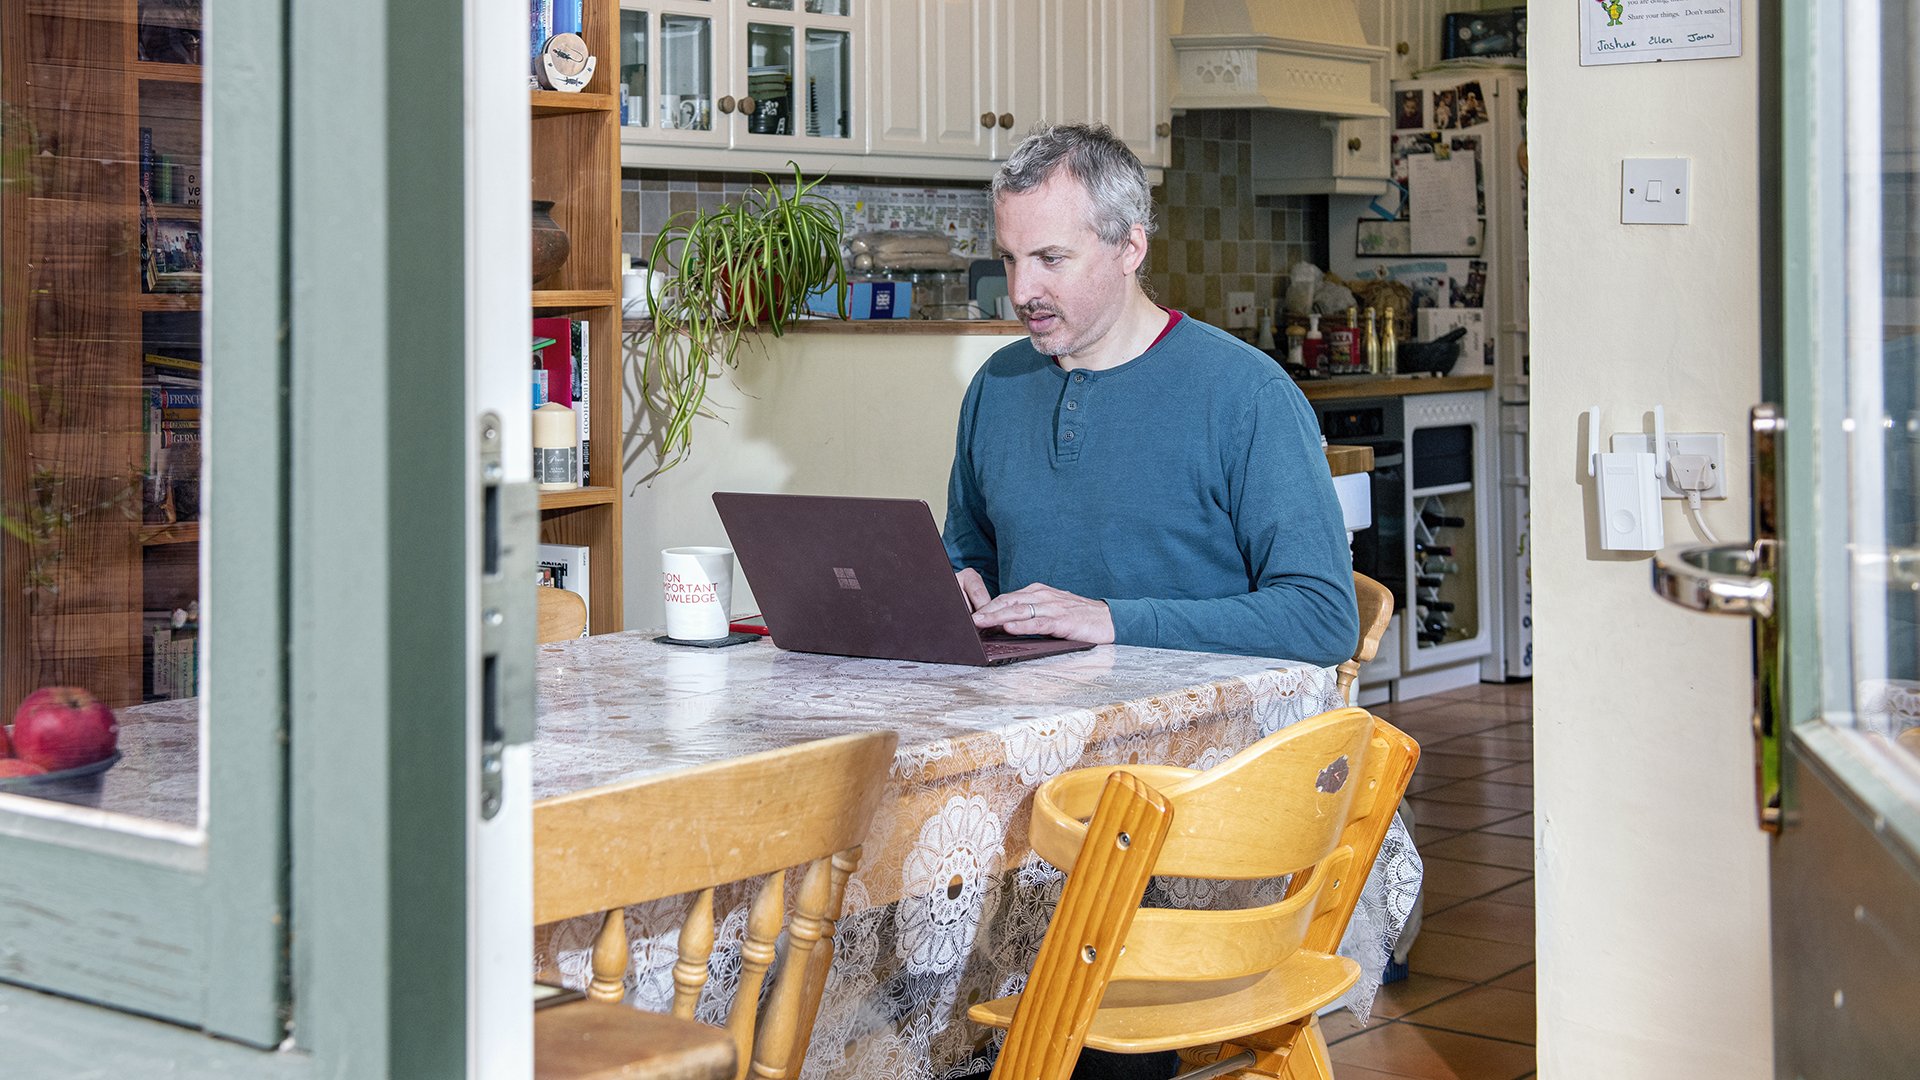 A man sits at a kitchen table working on a laptop